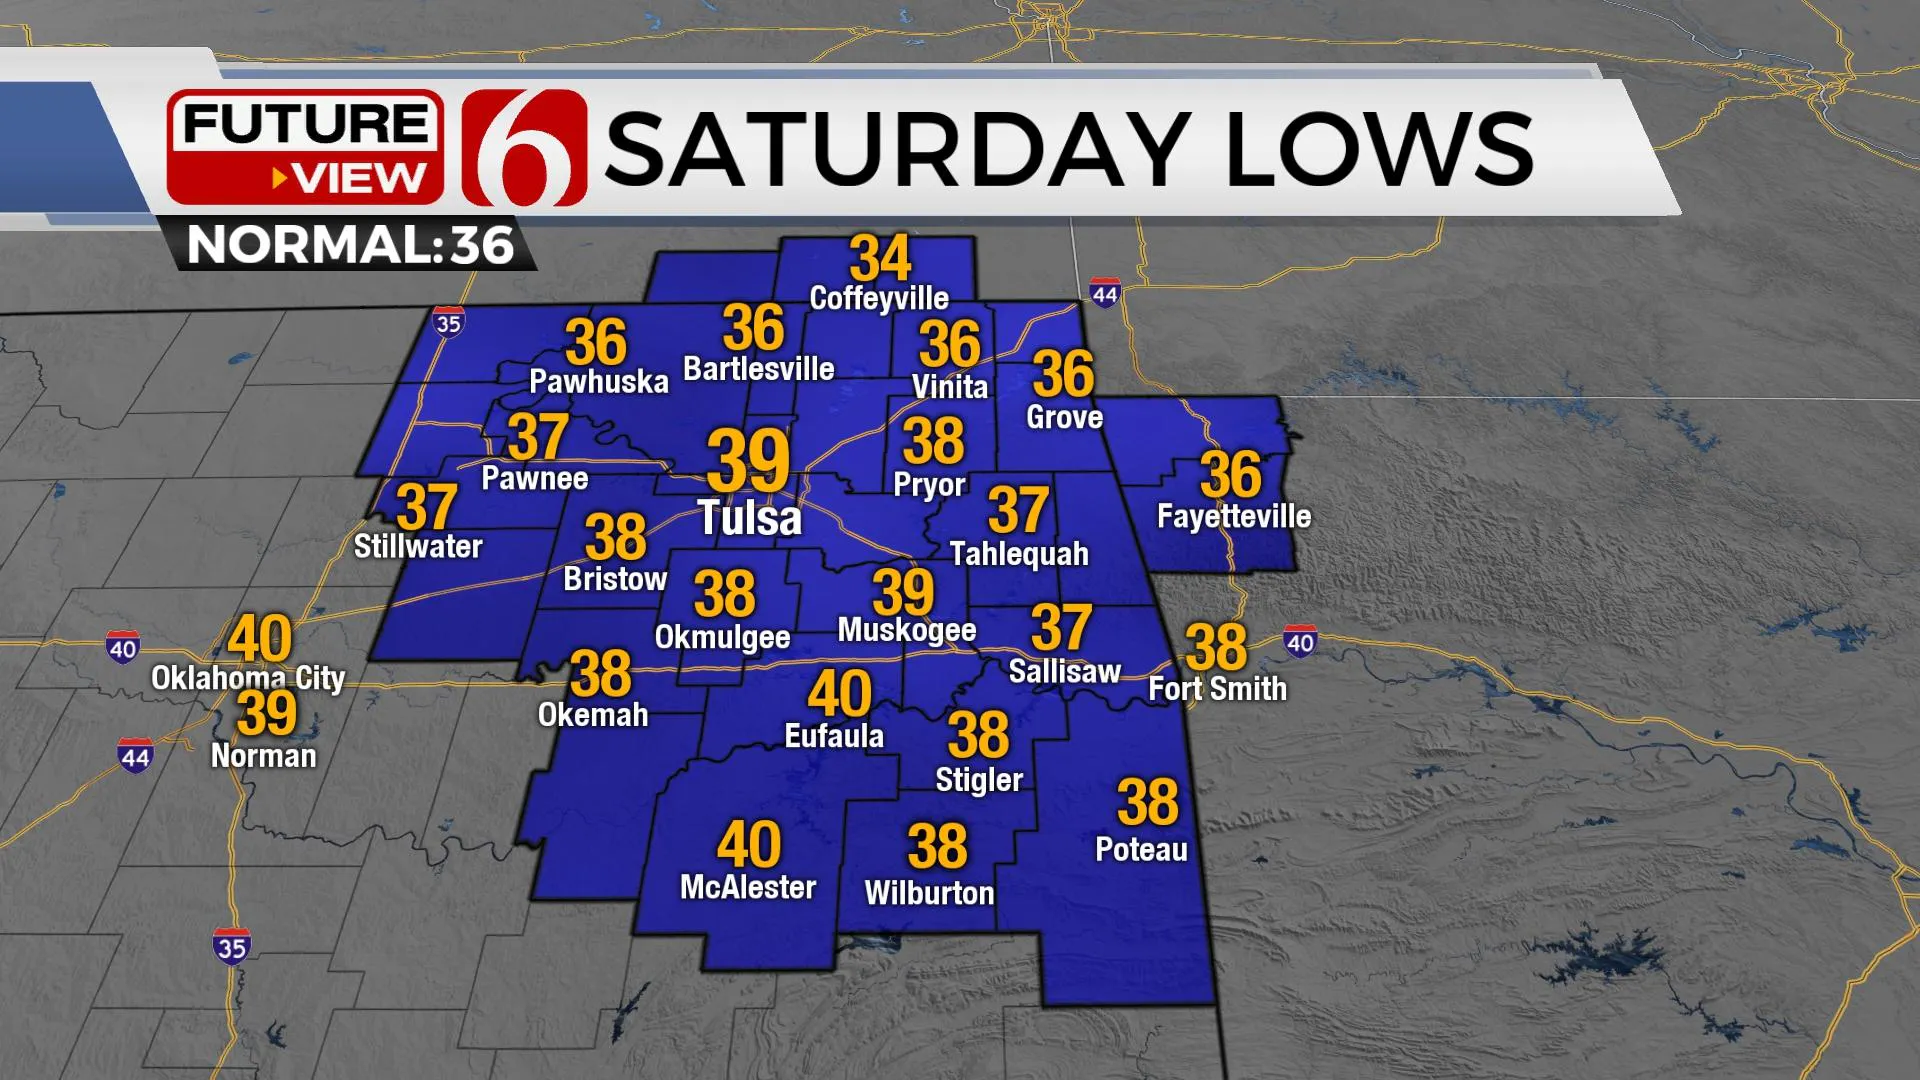 Low temps for Saturday morning.